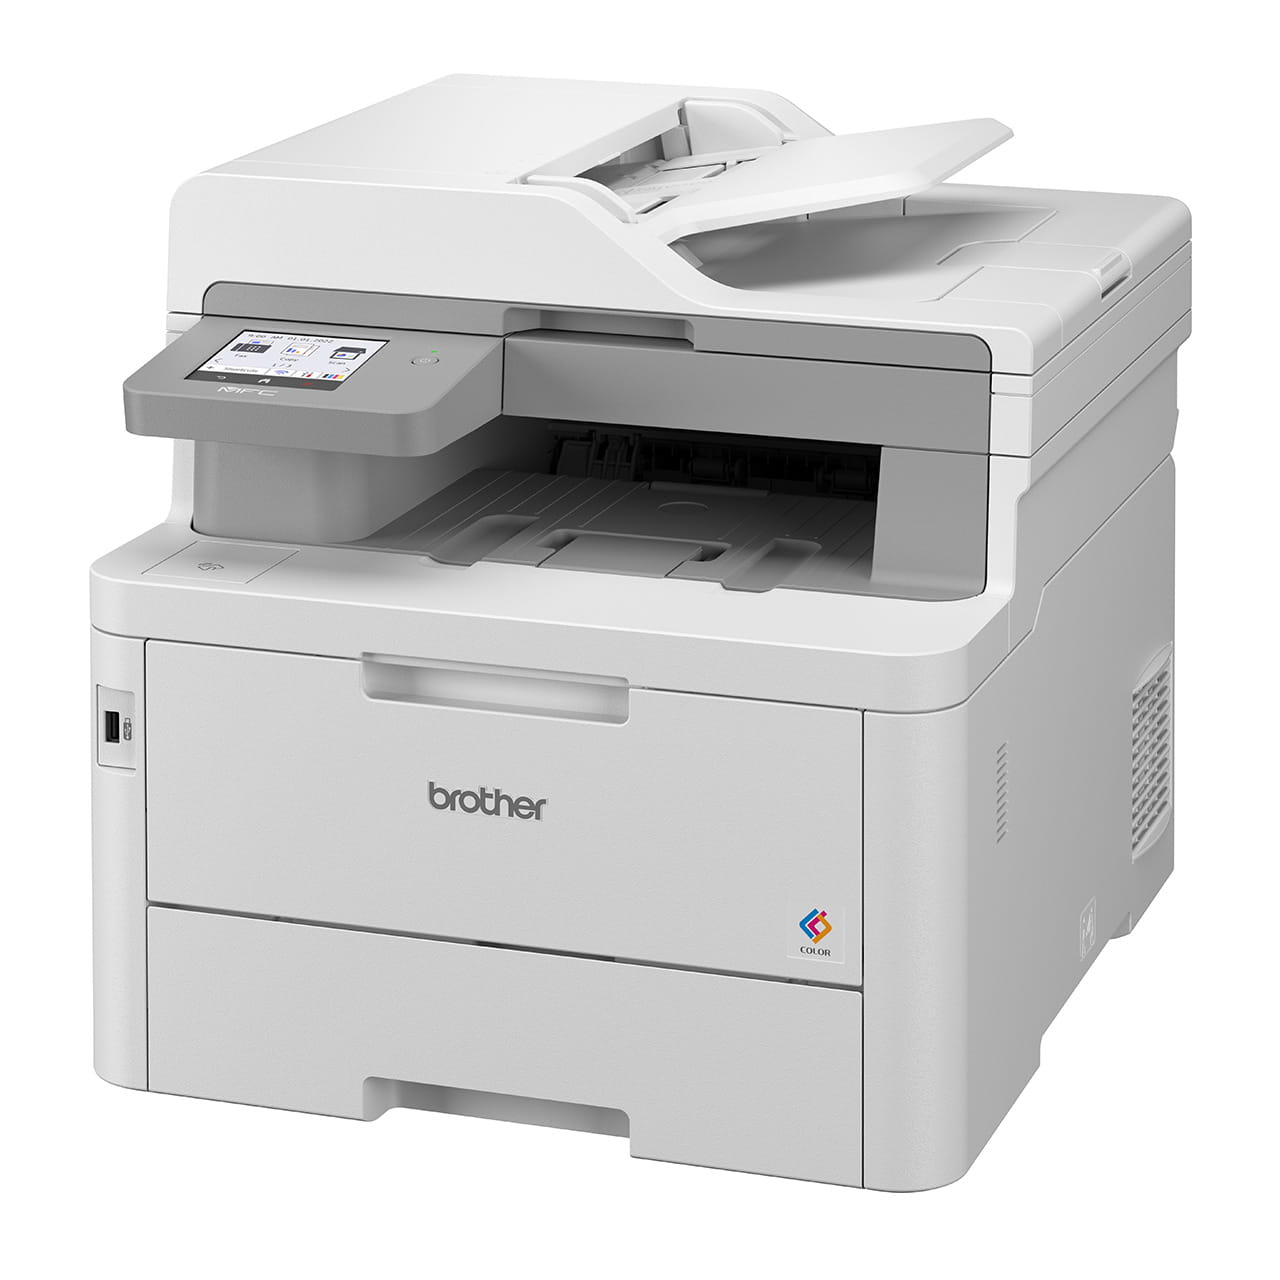 Brother MFC-L8390CDW Colour Laser Printer Left Side View